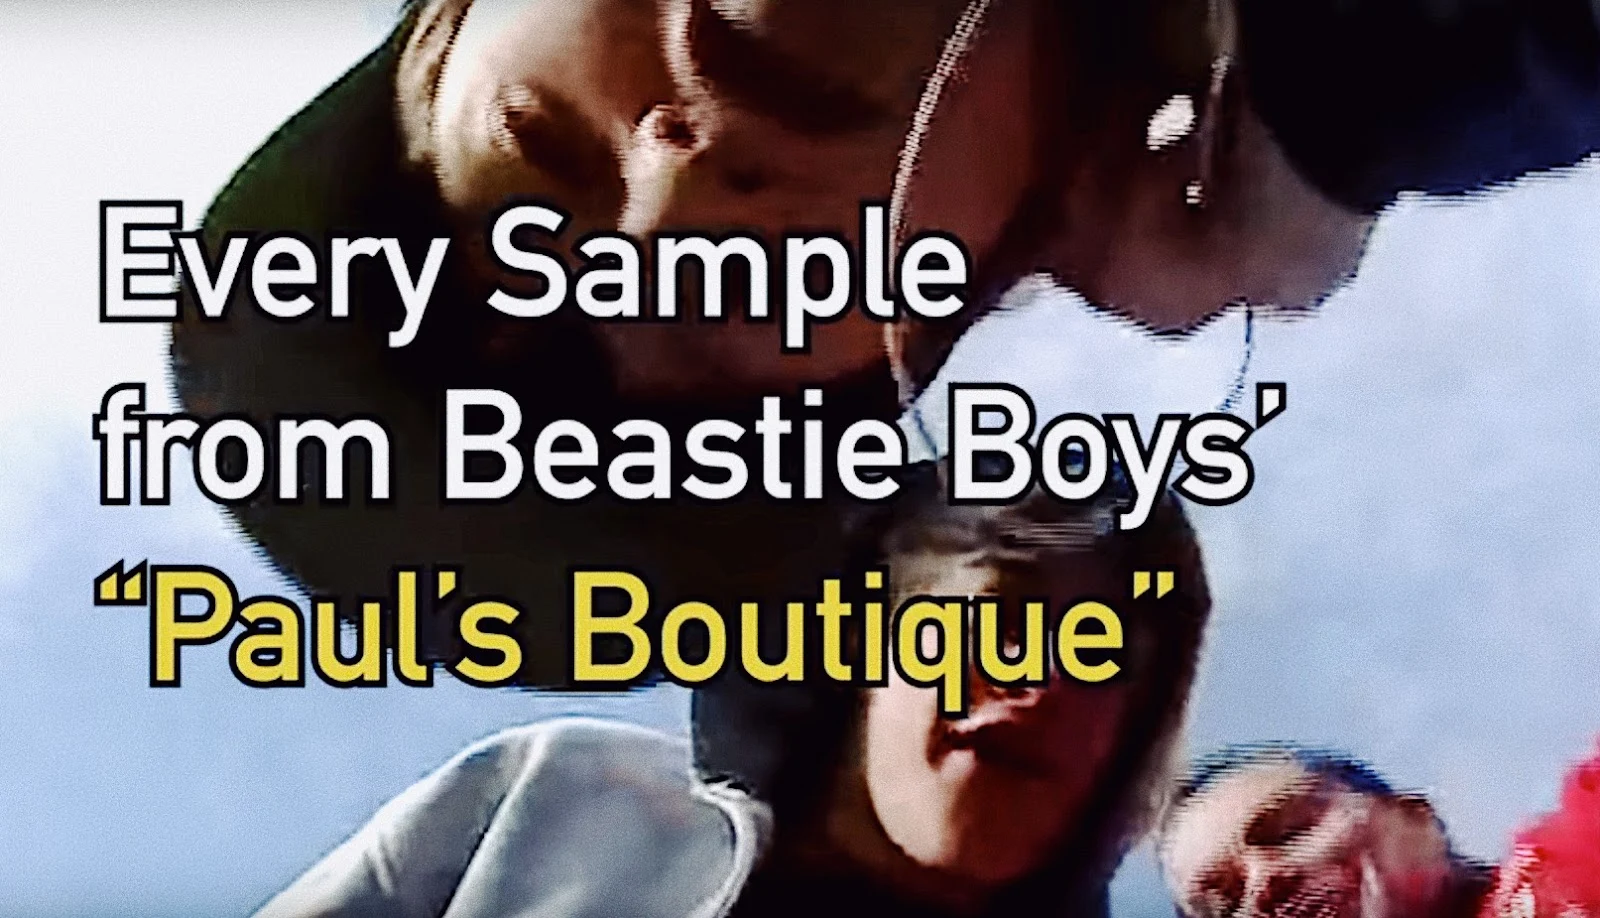 Every sample from the Beastie Boys 'Paul's Boutique' | Alle Sample des Albums in einem Video gezeigt 